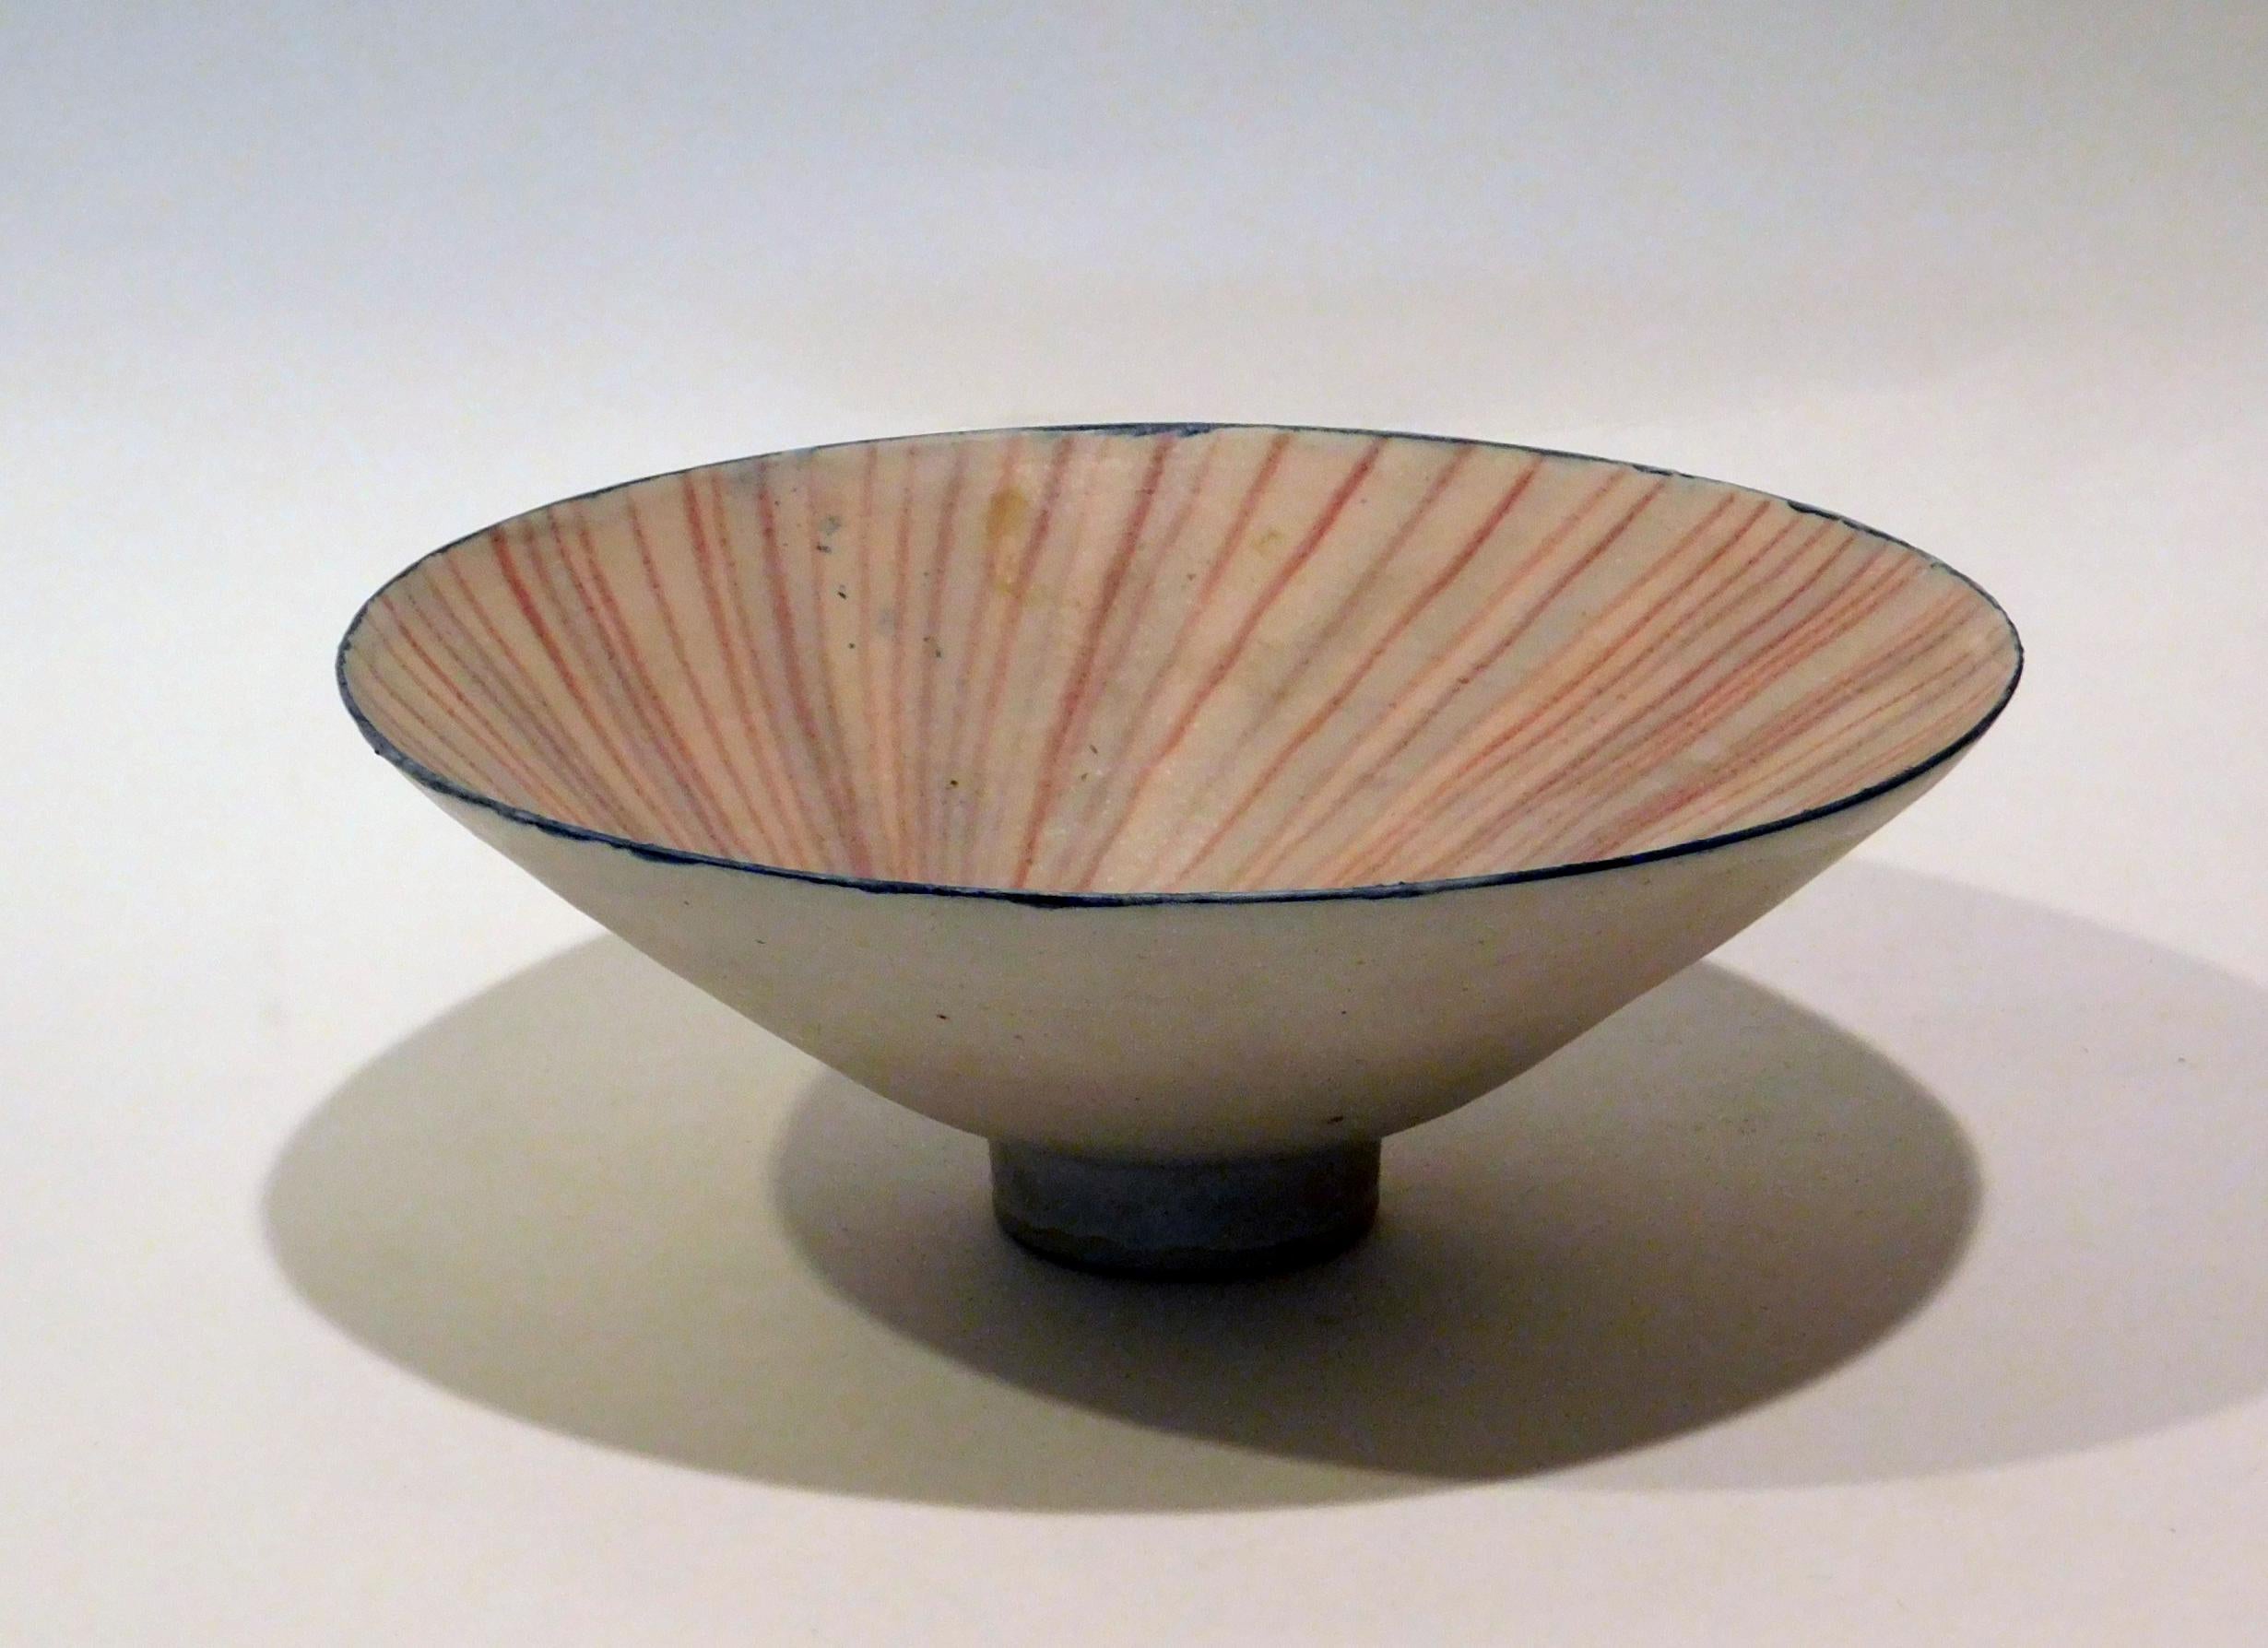 Emmanuel Cooper (1938 - 2012) UK Ceramist - flared footed studio bowl.
The interior is decorated with an alternating pink and blue pinwheel design.
Excellent condition. The EC mark is seen on the bottom.
Measures: height: 3 5/8 inches. Diameter: